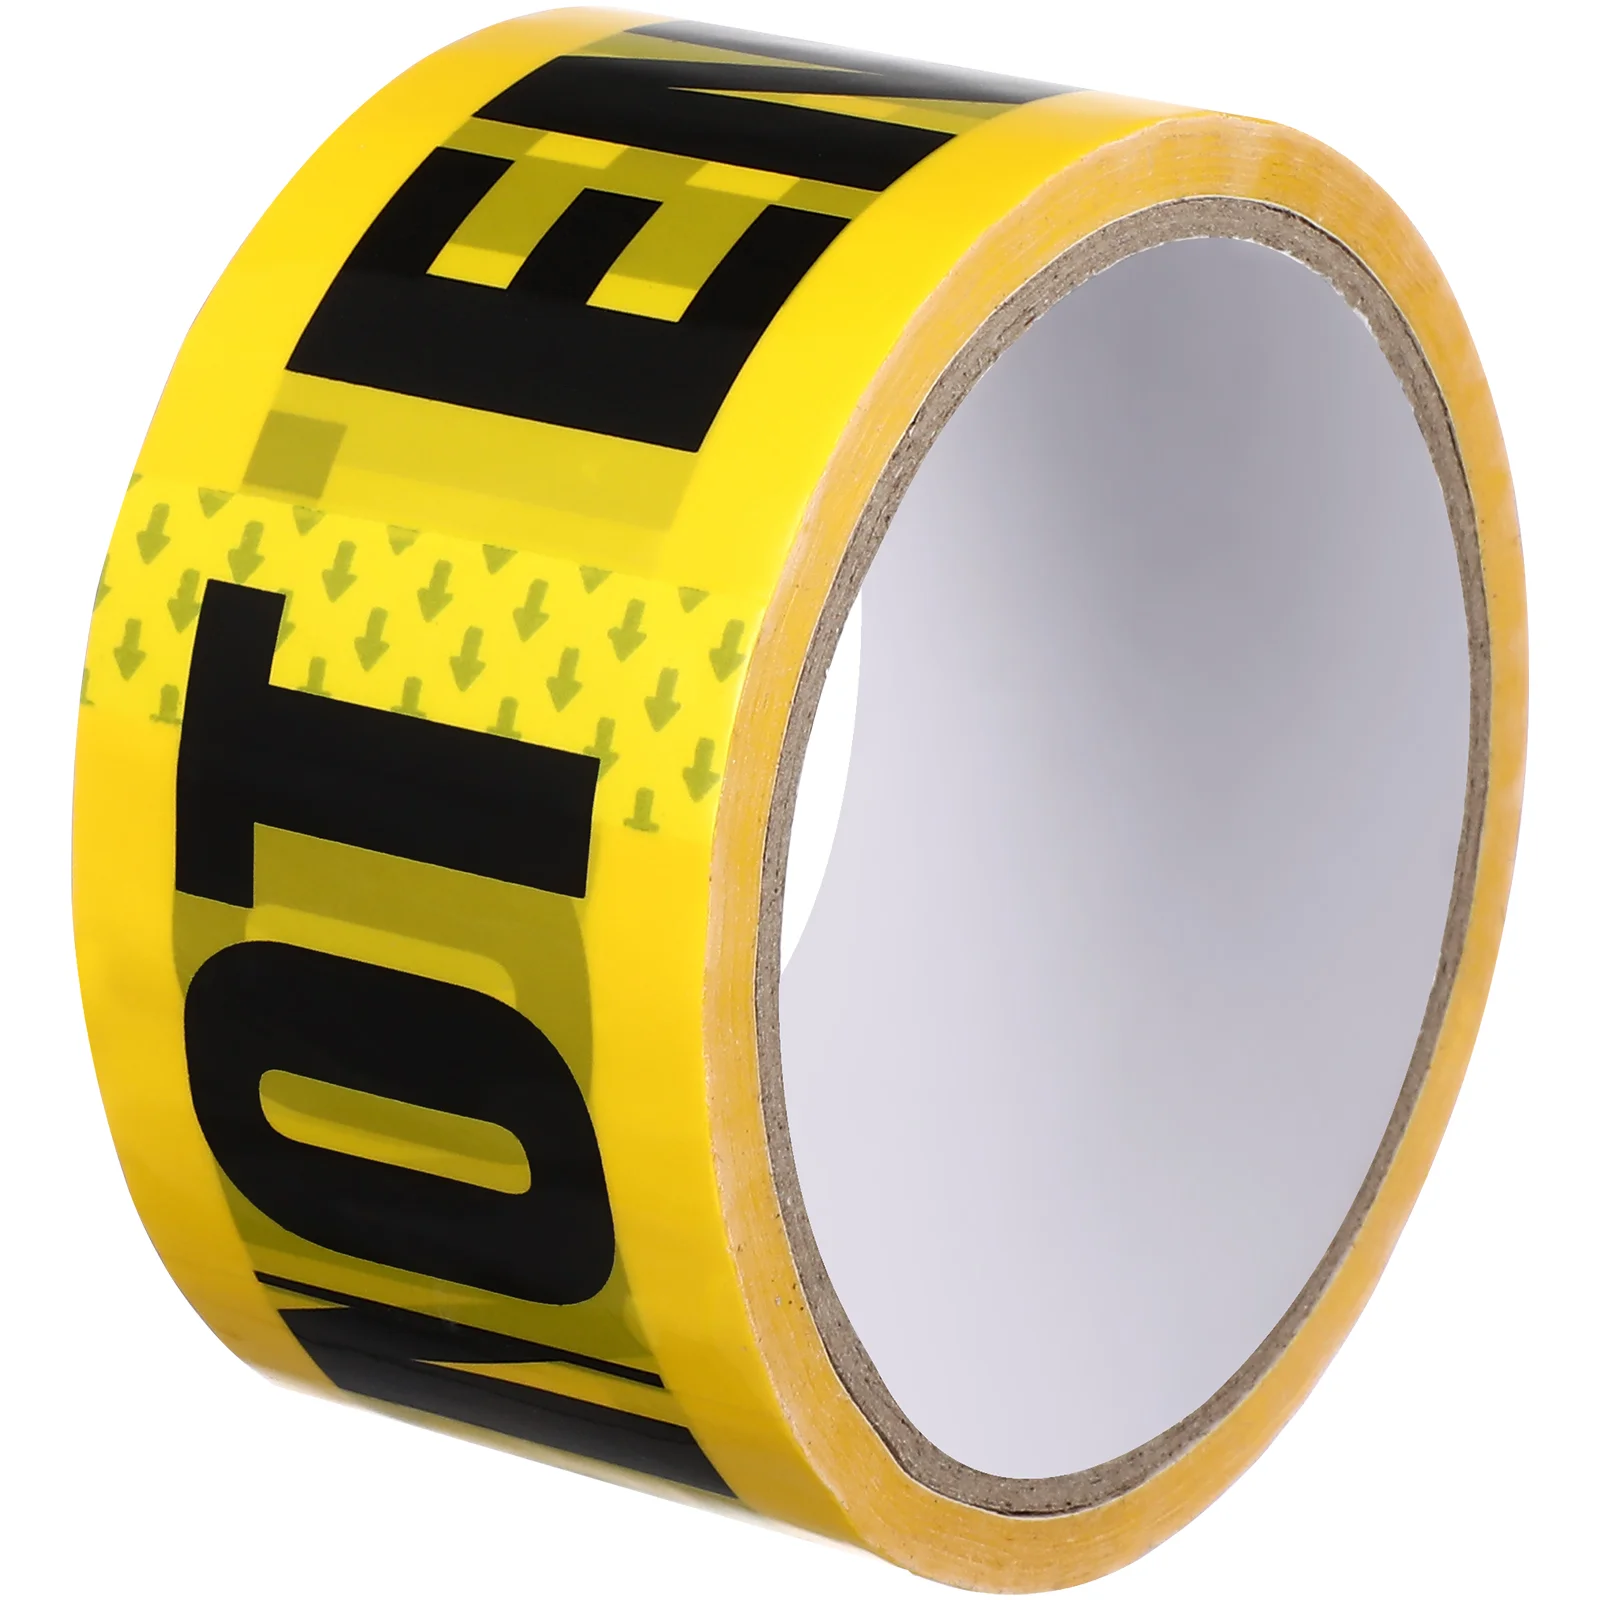 

DO NOT ENTER Safety Tape Wear-resistant Safe Self Adhesive Sticker PVC Warning Tape for Walls Floors Pipes Crime scene